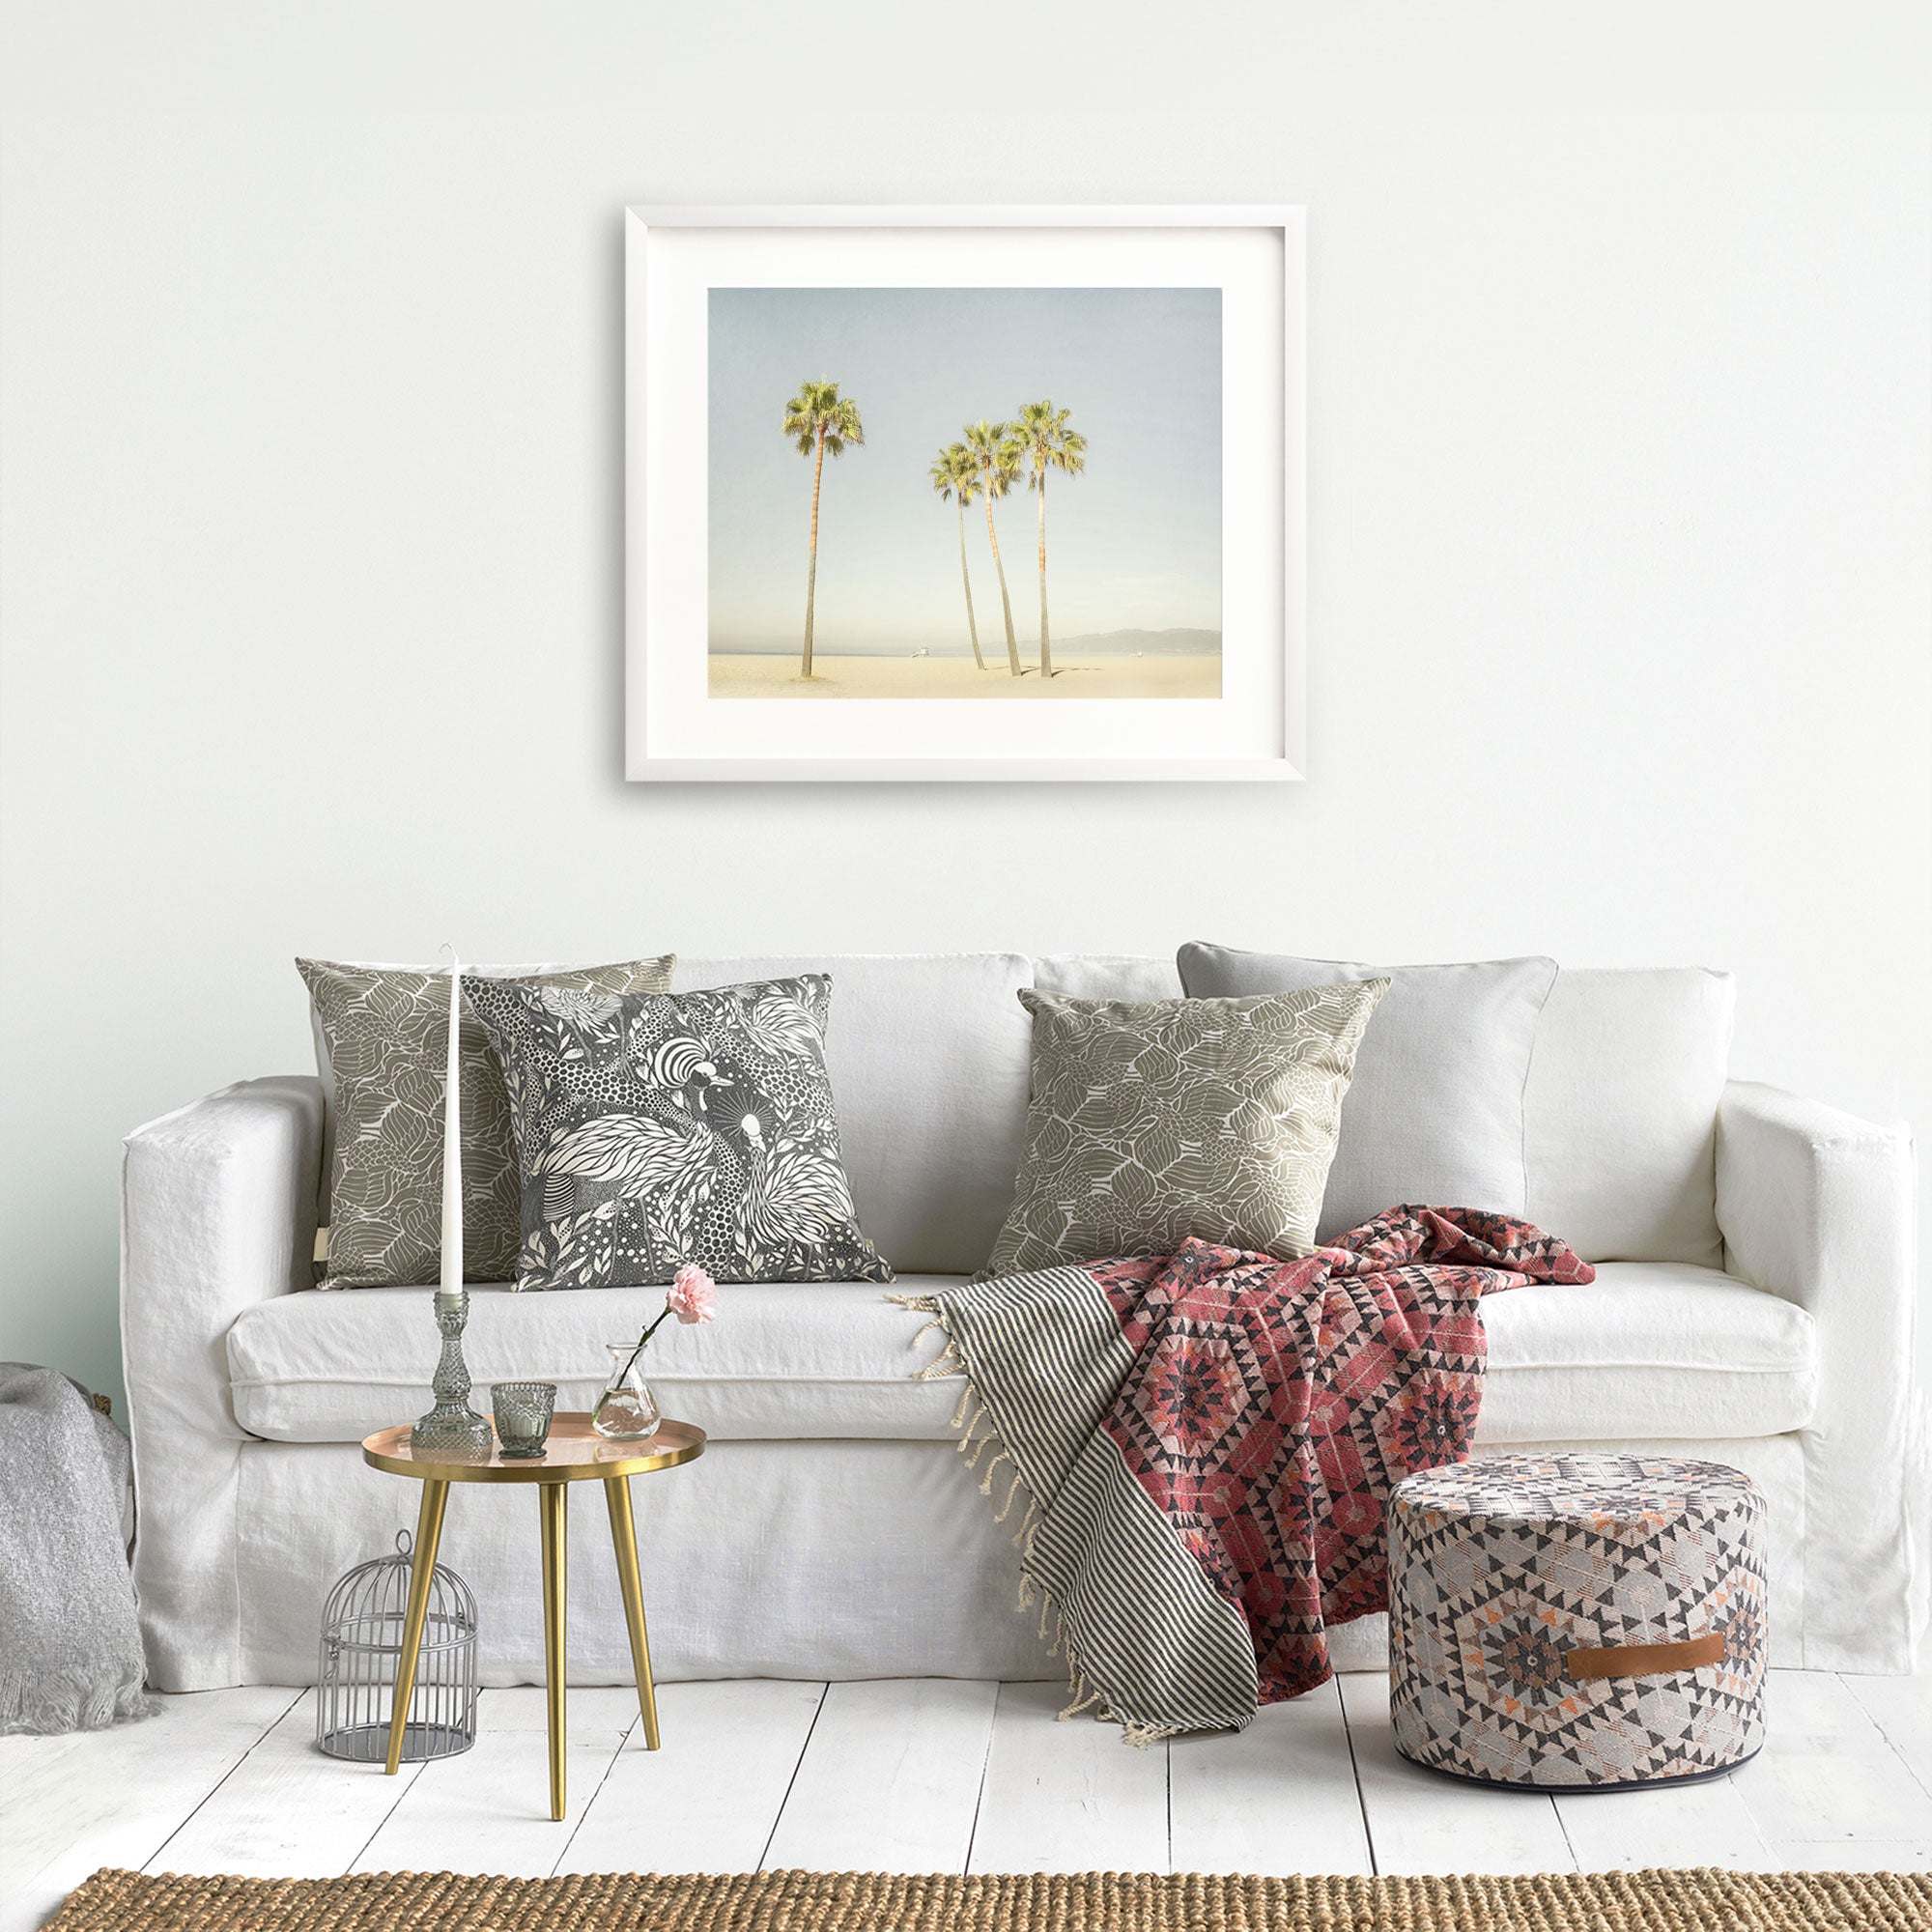 A cozy living room scene with a white sofa adorned with patterned cushions, a red patterned throw, a small round table with decor items, a woven pouf, and an Offley Green &#39;California Venice Beach Print, Boardwalk Palms&#39; unframed print.